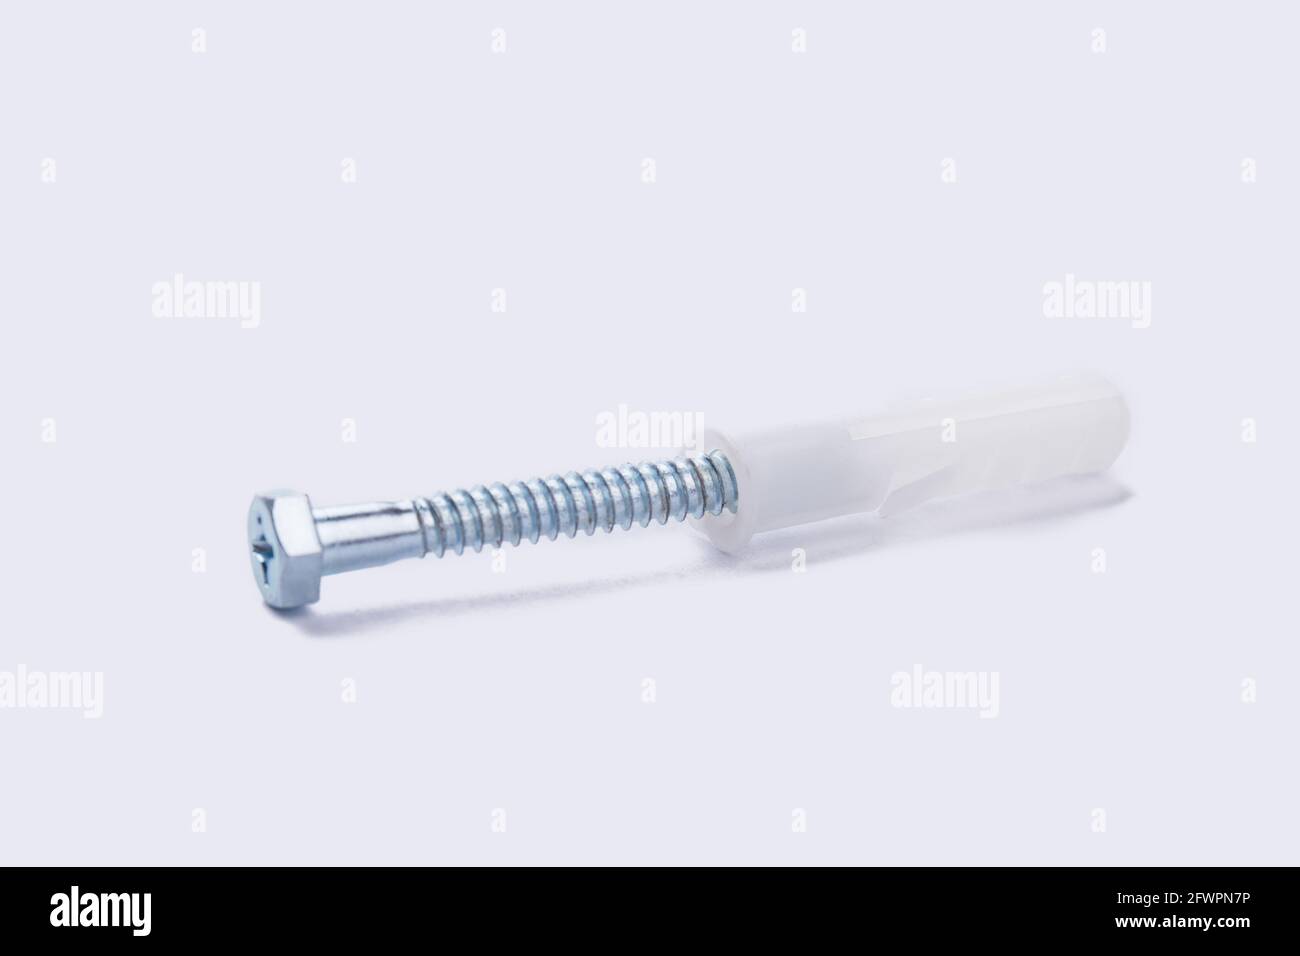 Dowel and screw on white background. Stock Photo